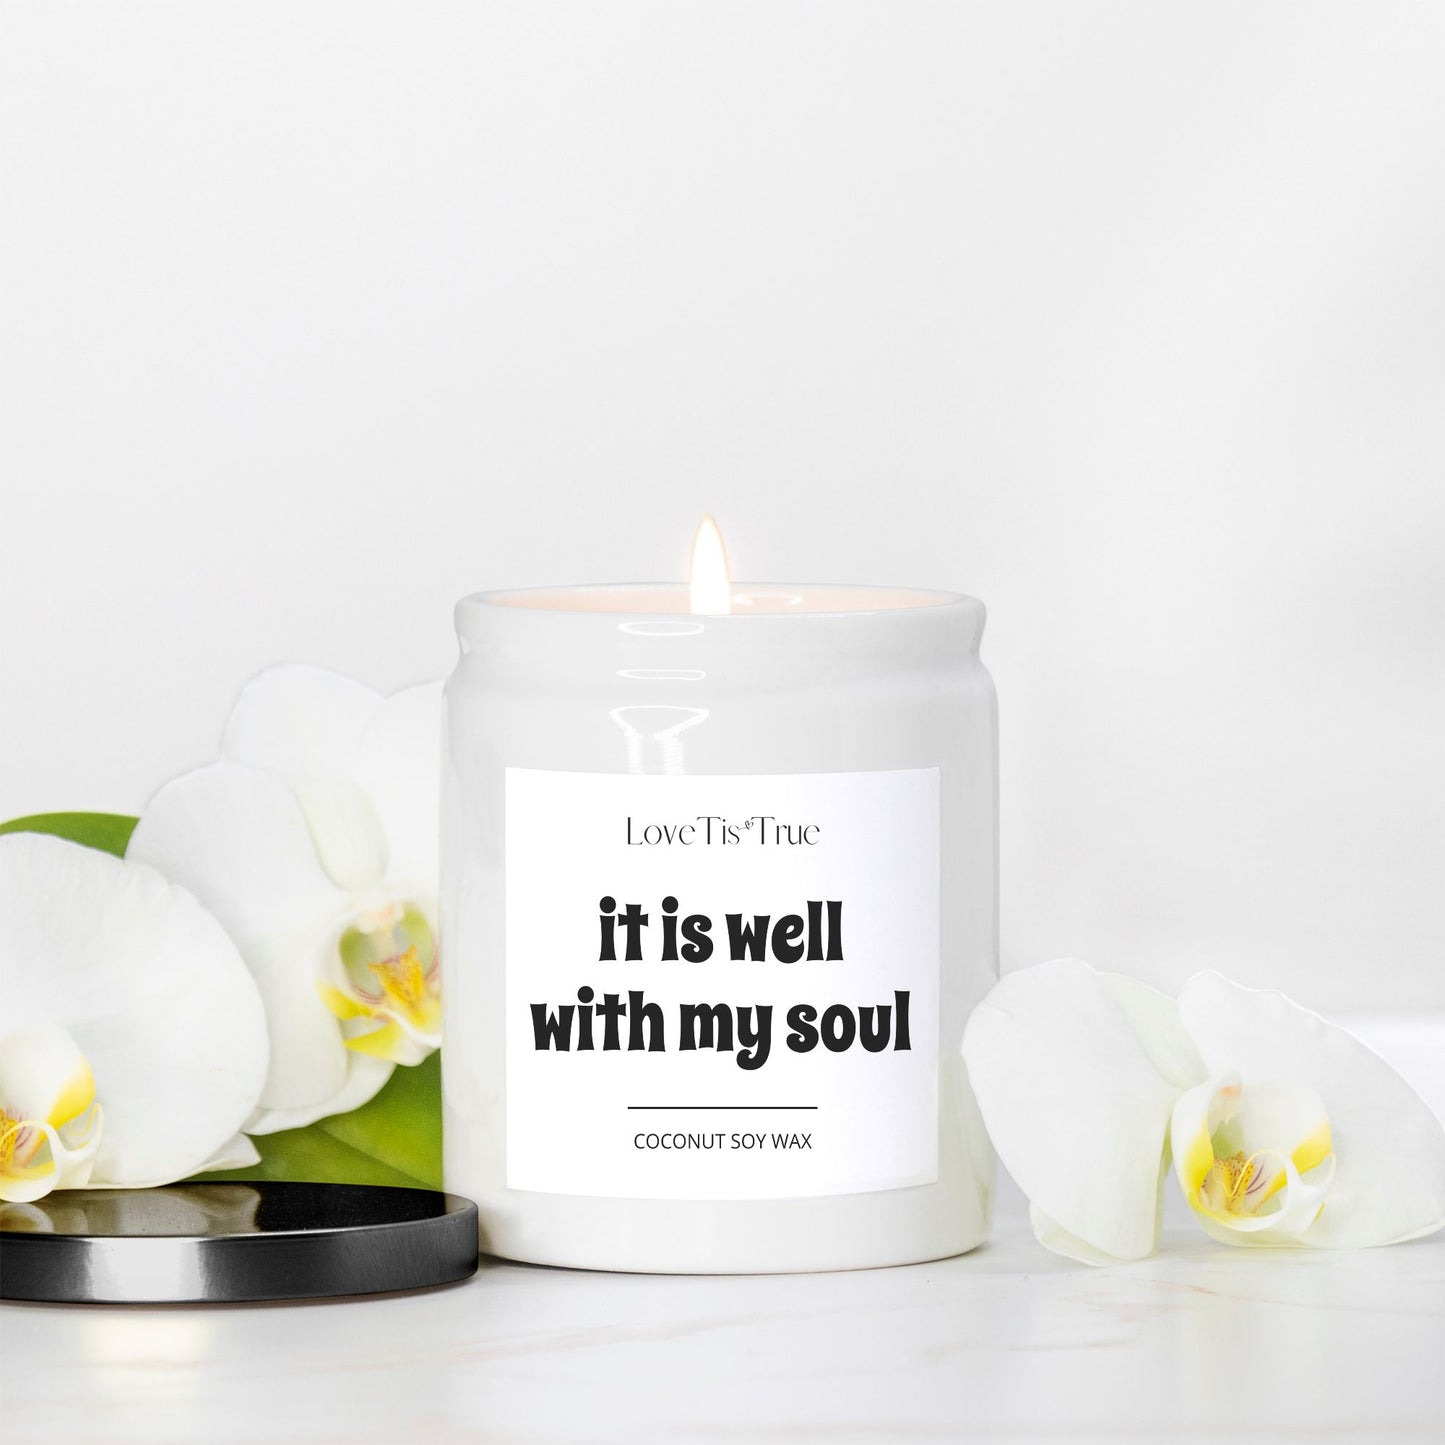 It is well with my soul 8oz Ceramic Candle